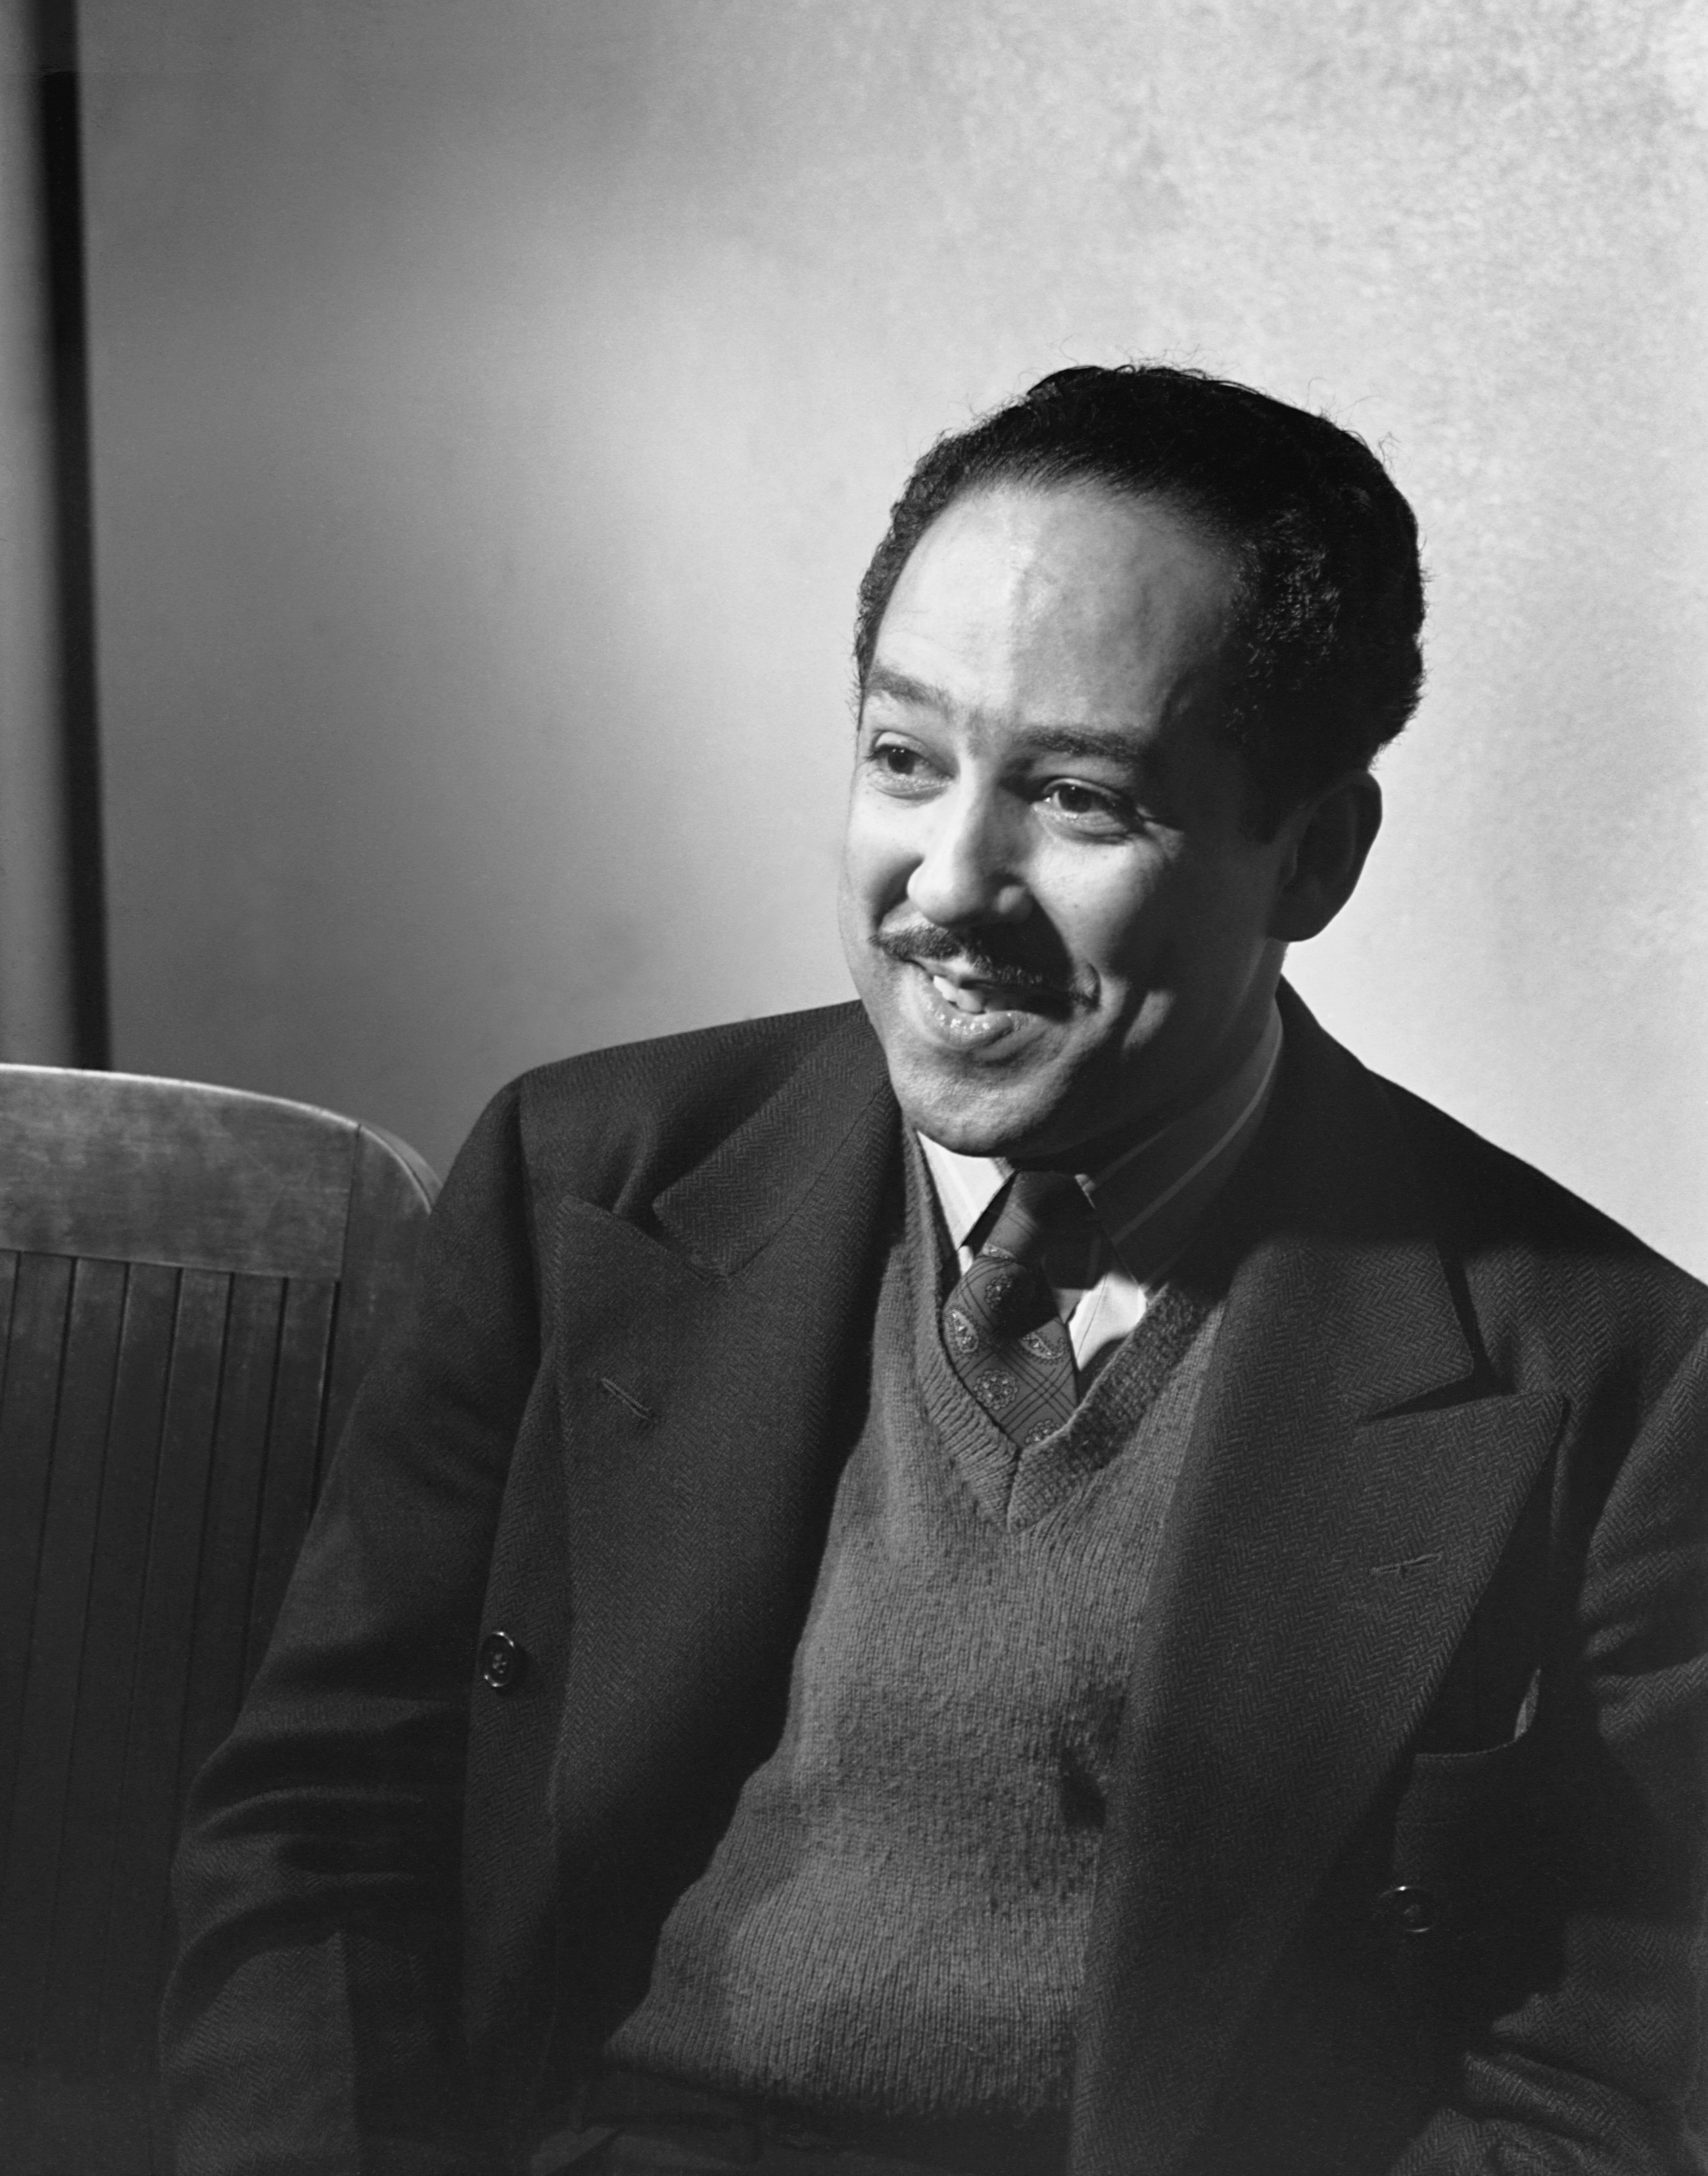 A portrait of Langston Hughes from 1942